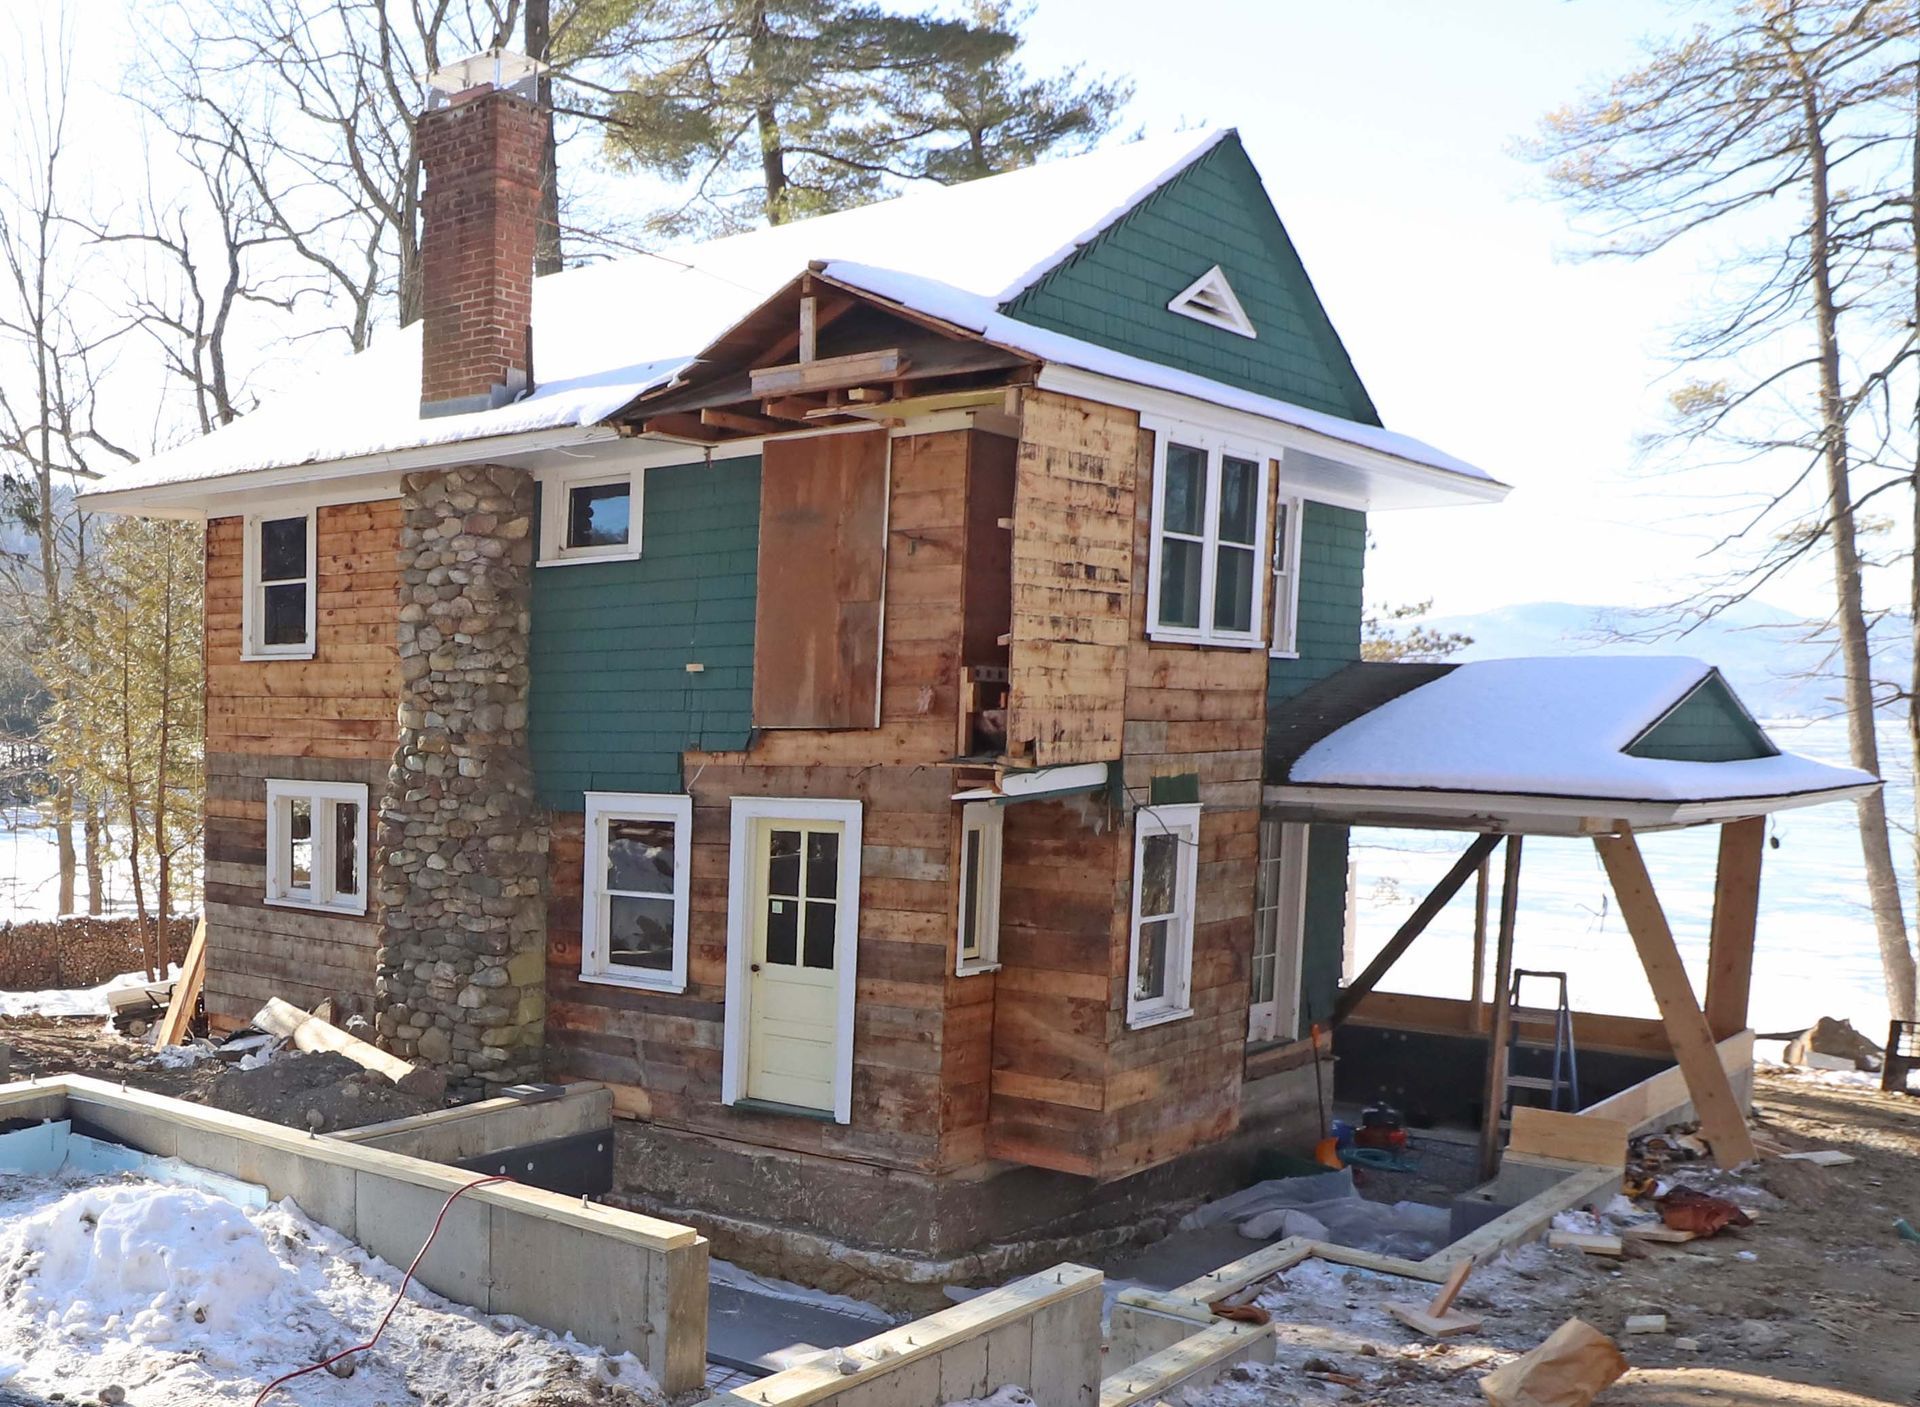 A house with a green roof is being remodeled in the snow